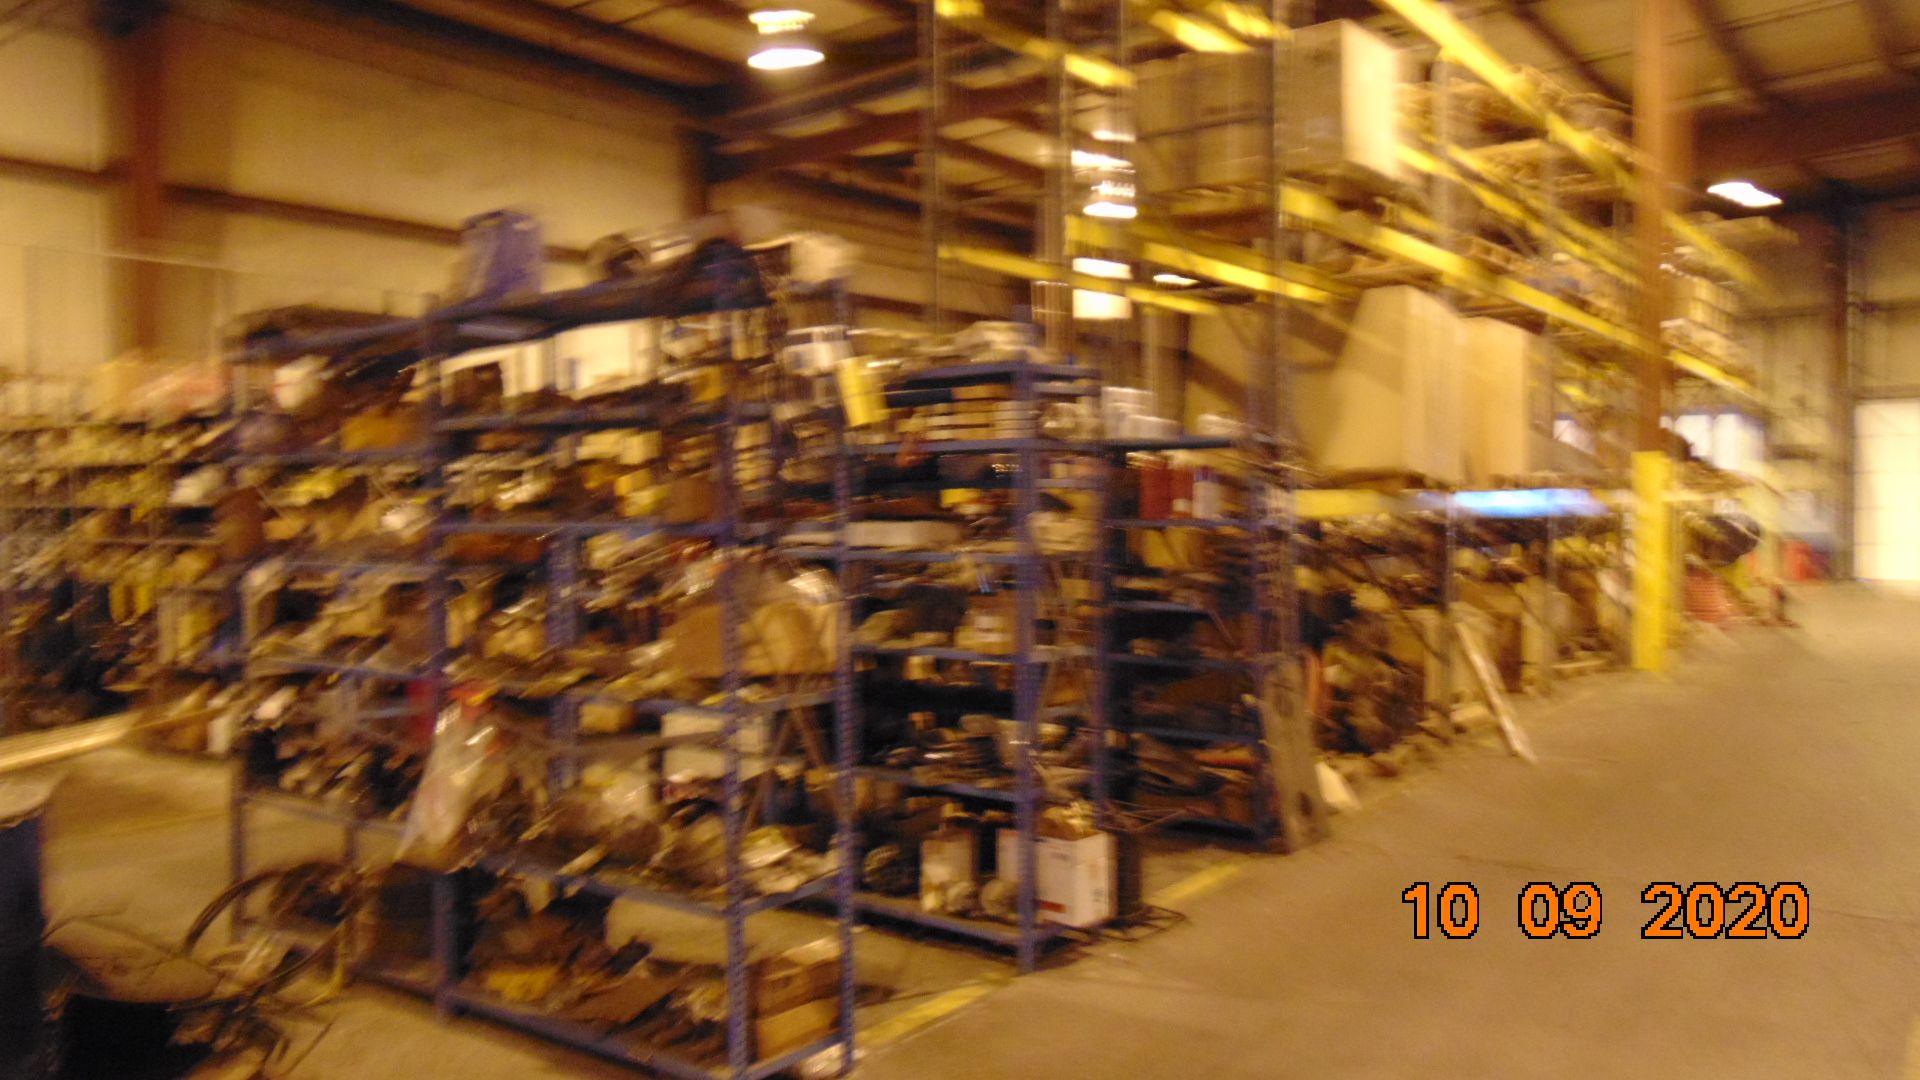 Contents of Warehouse / Industrial Building - Image 21 of 26